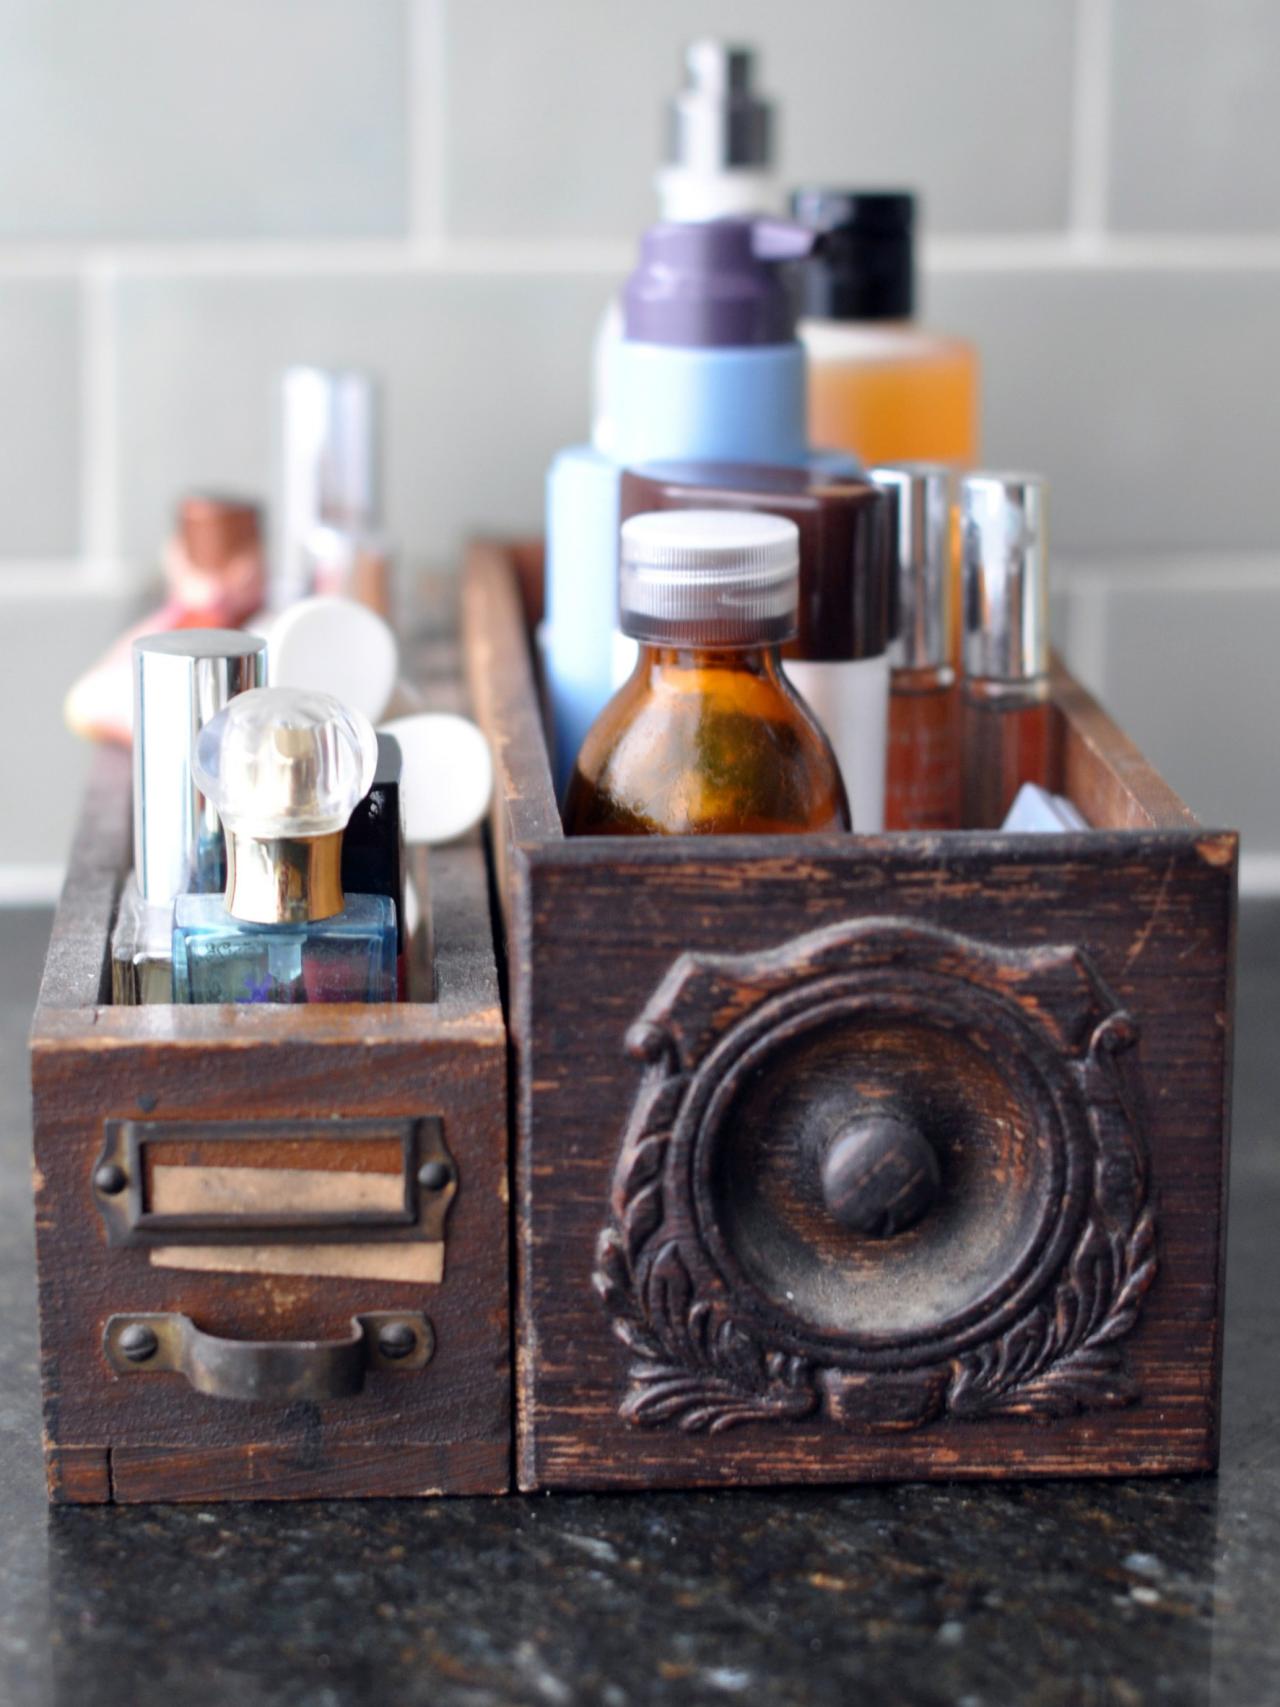 Vintage Bathroom Decor Ideas Pictures & Tips From HGTV   HGTV